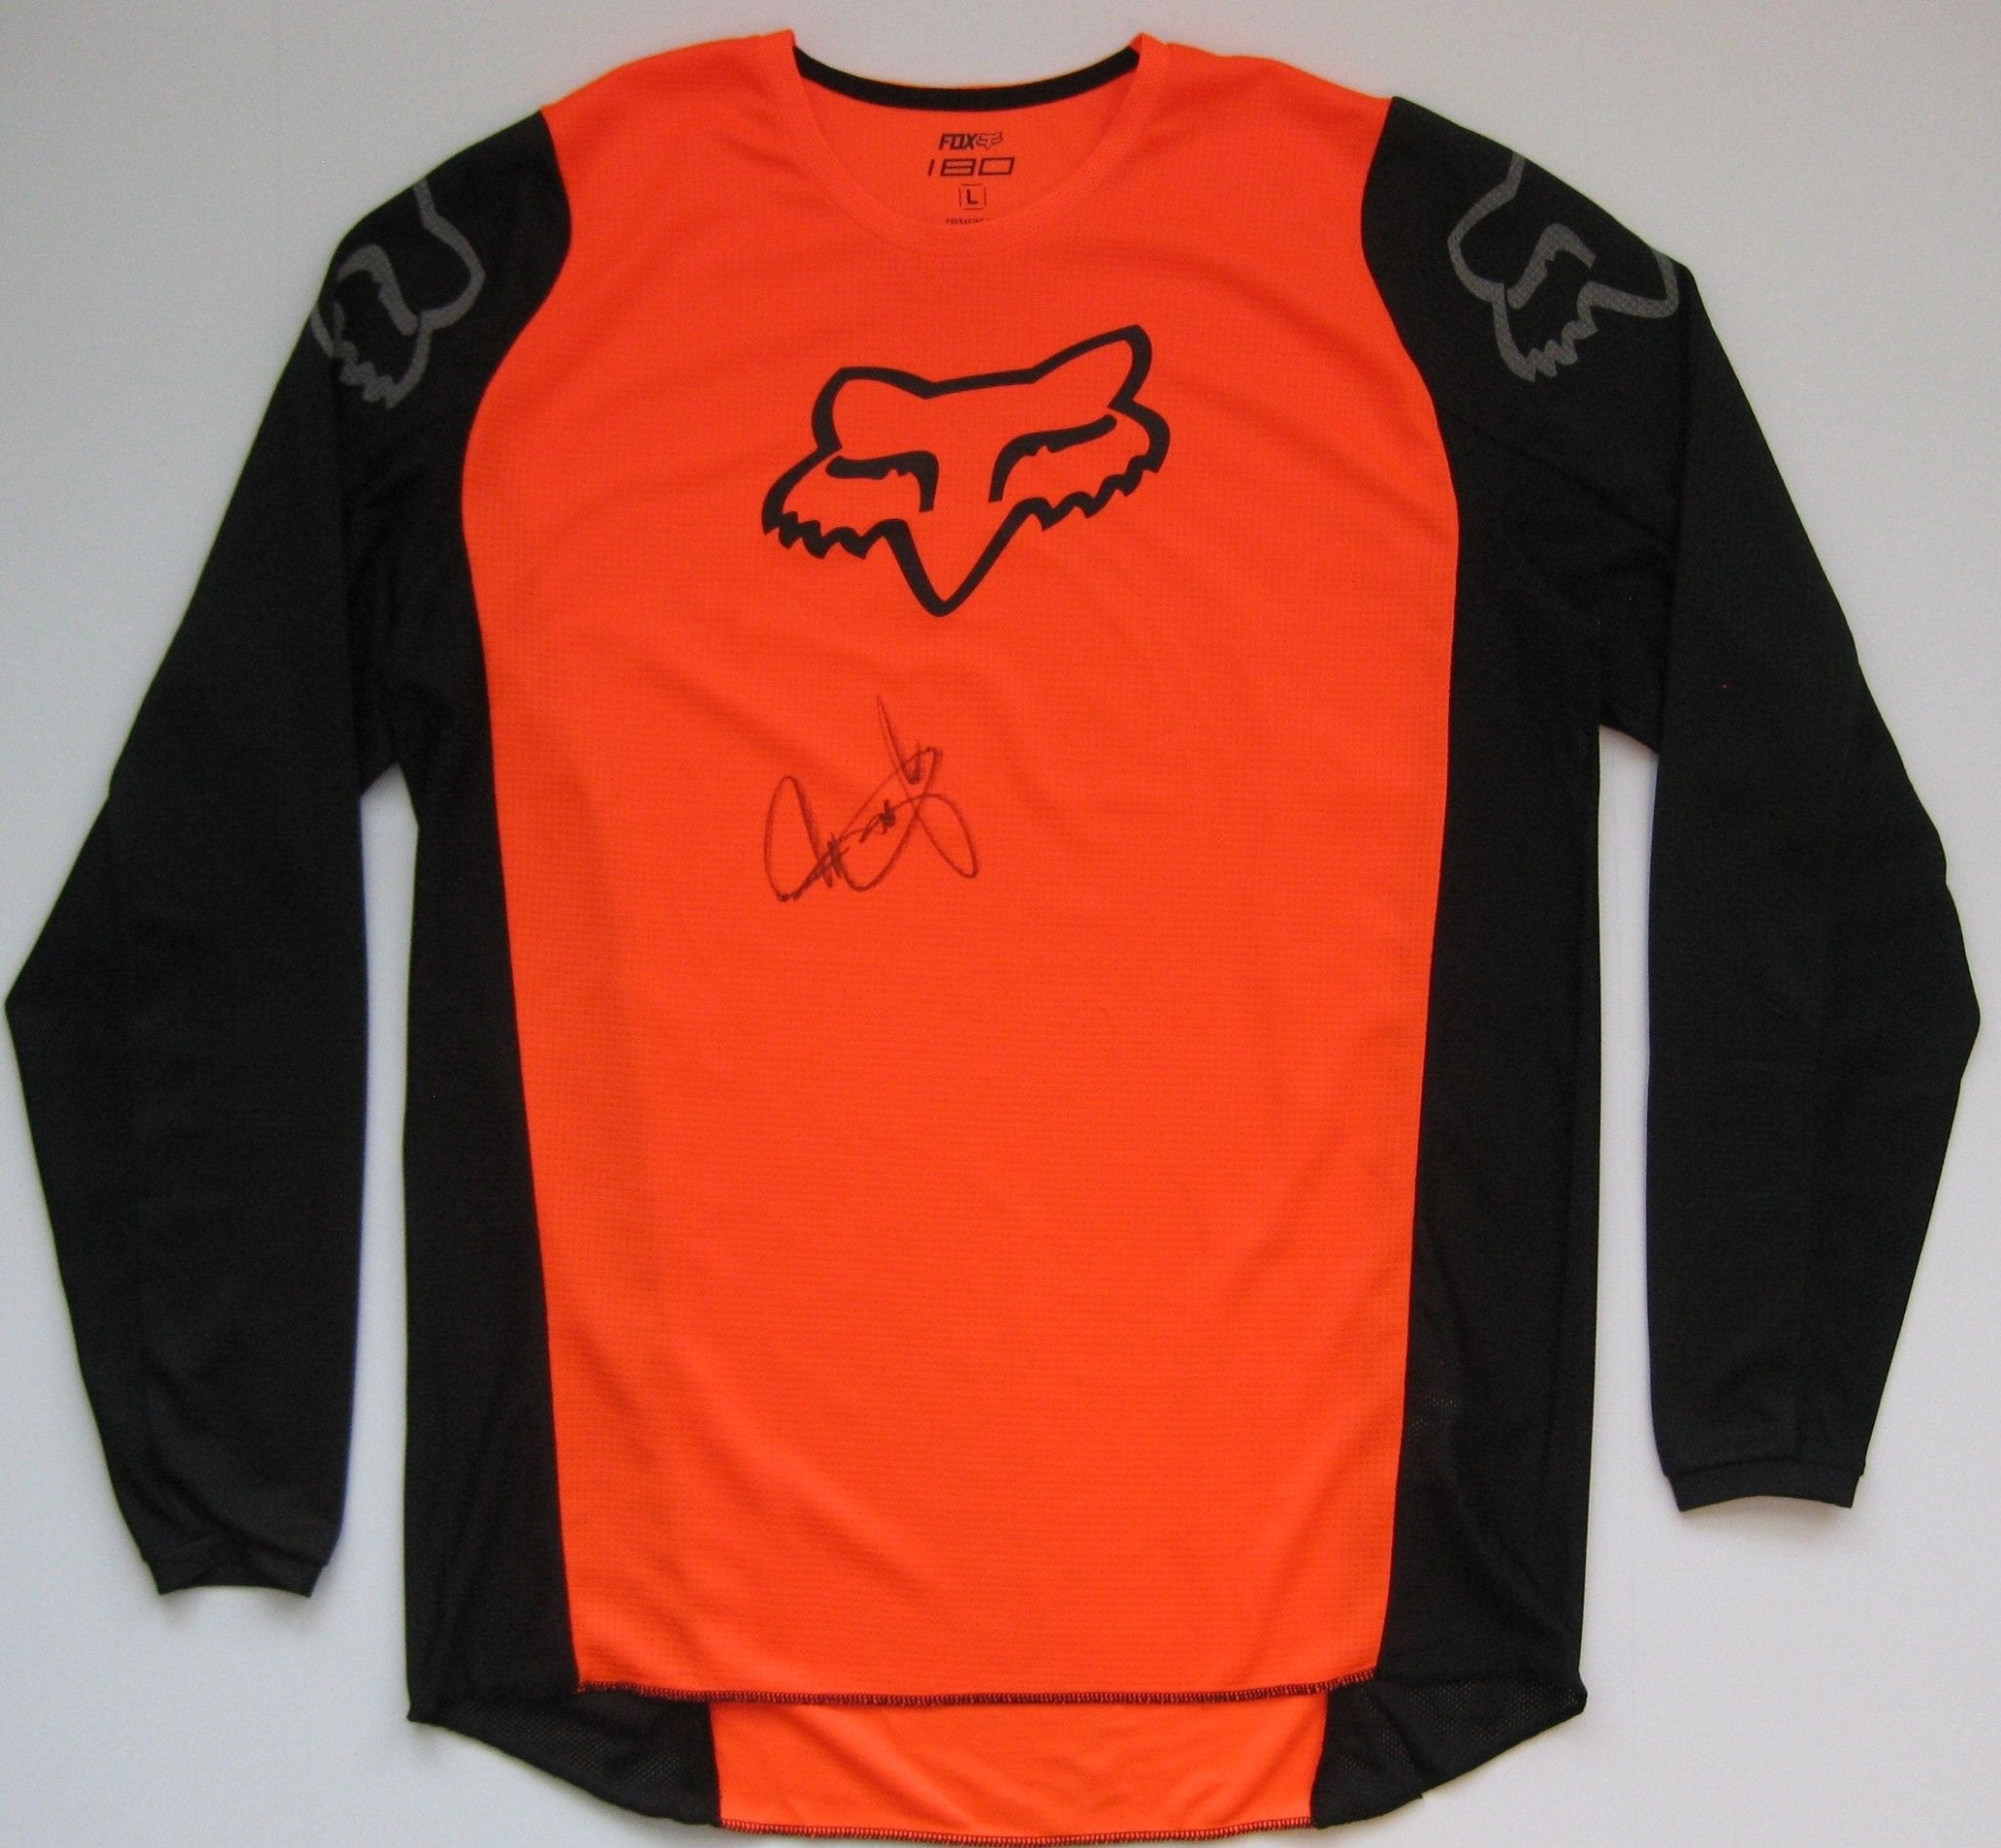 Ryan Dungey Used And Signed Jersey